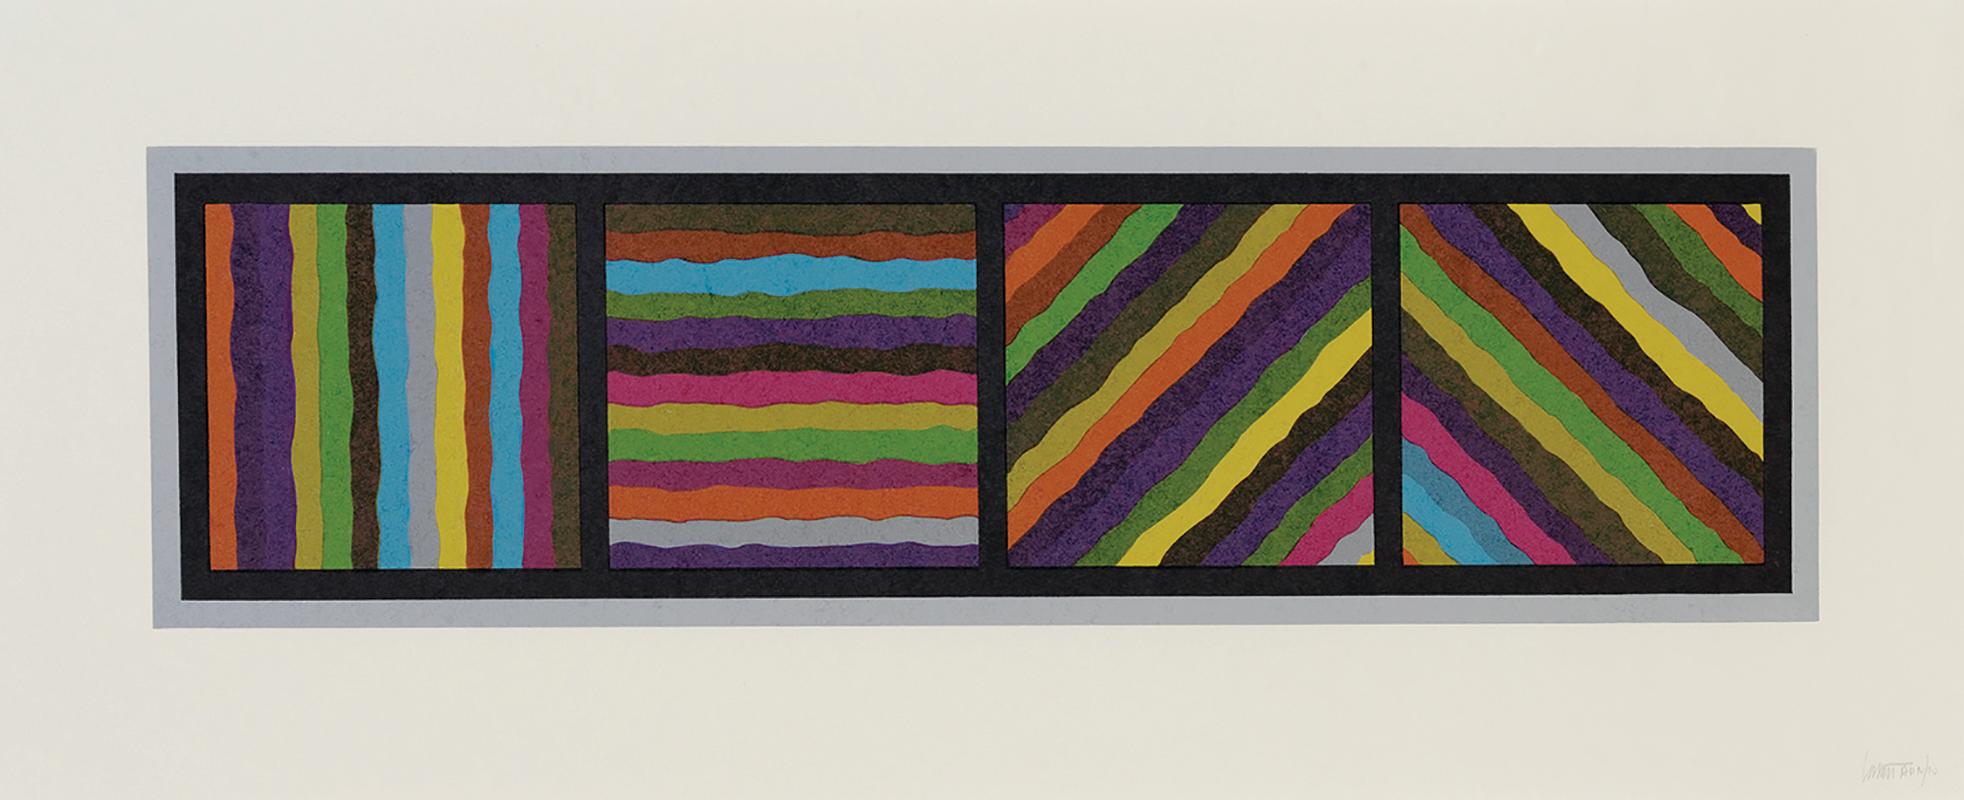 Bands (not straight) in Four Directions - Sol LeWitt, Prints, Woodcut, Abstract.